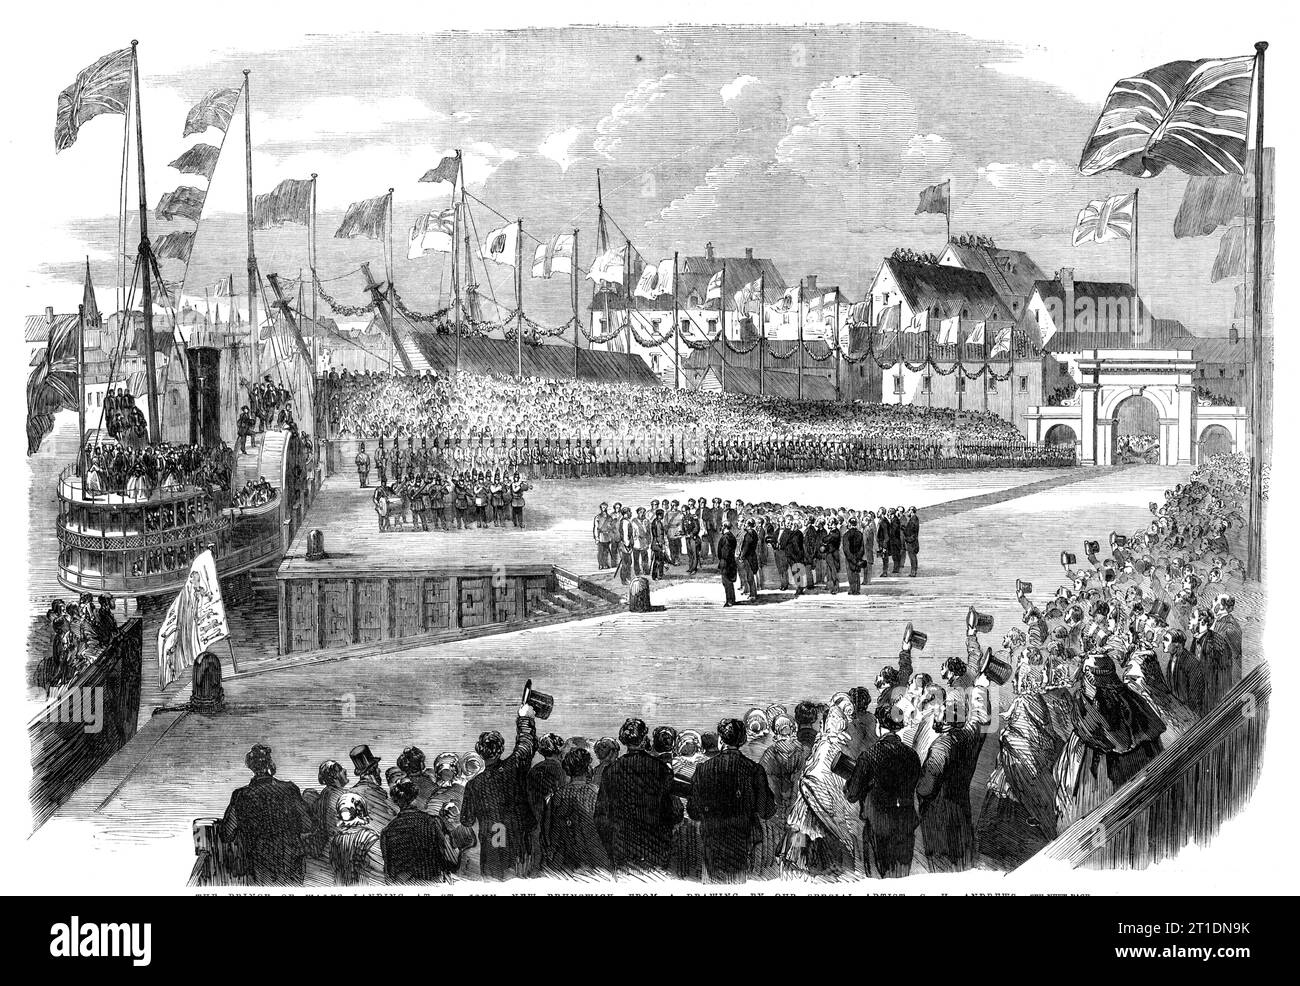 The Prince of Wales landing at St. John, New Brunswick, [Canada], - from a drawing by our special artist G. H. Andrews, 1860. 'His Royal Highness [future King Edward VII] reached the harbour of St. John late on the evening of Thursday, the 2nd August, the cannons on Partridge Island bearing the signal of the joyful tidings. An immense crowd of people, eager spectators, assembled at the wharf called Reed's Point to witness the arrival of the steamer, which was greeted with prolonged and enthusiastic cheering. At ten o'clock the following morning the Prince and suite disembarked from the Styx, a Stock Photo